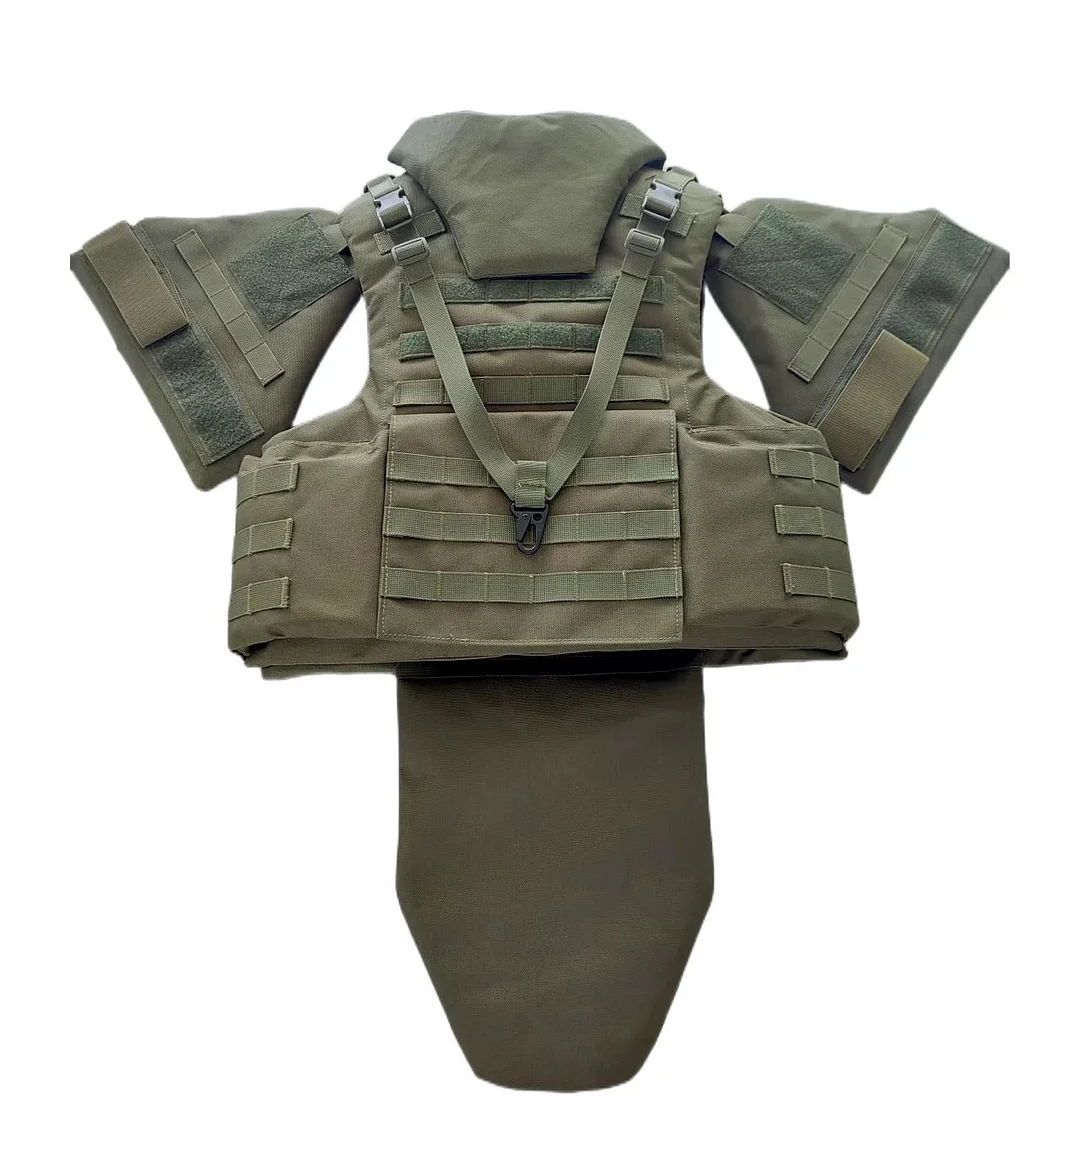 Helmetbro Full Protective Level IV Body Armor for Soldiers and Police 10 Bulletproof Panels